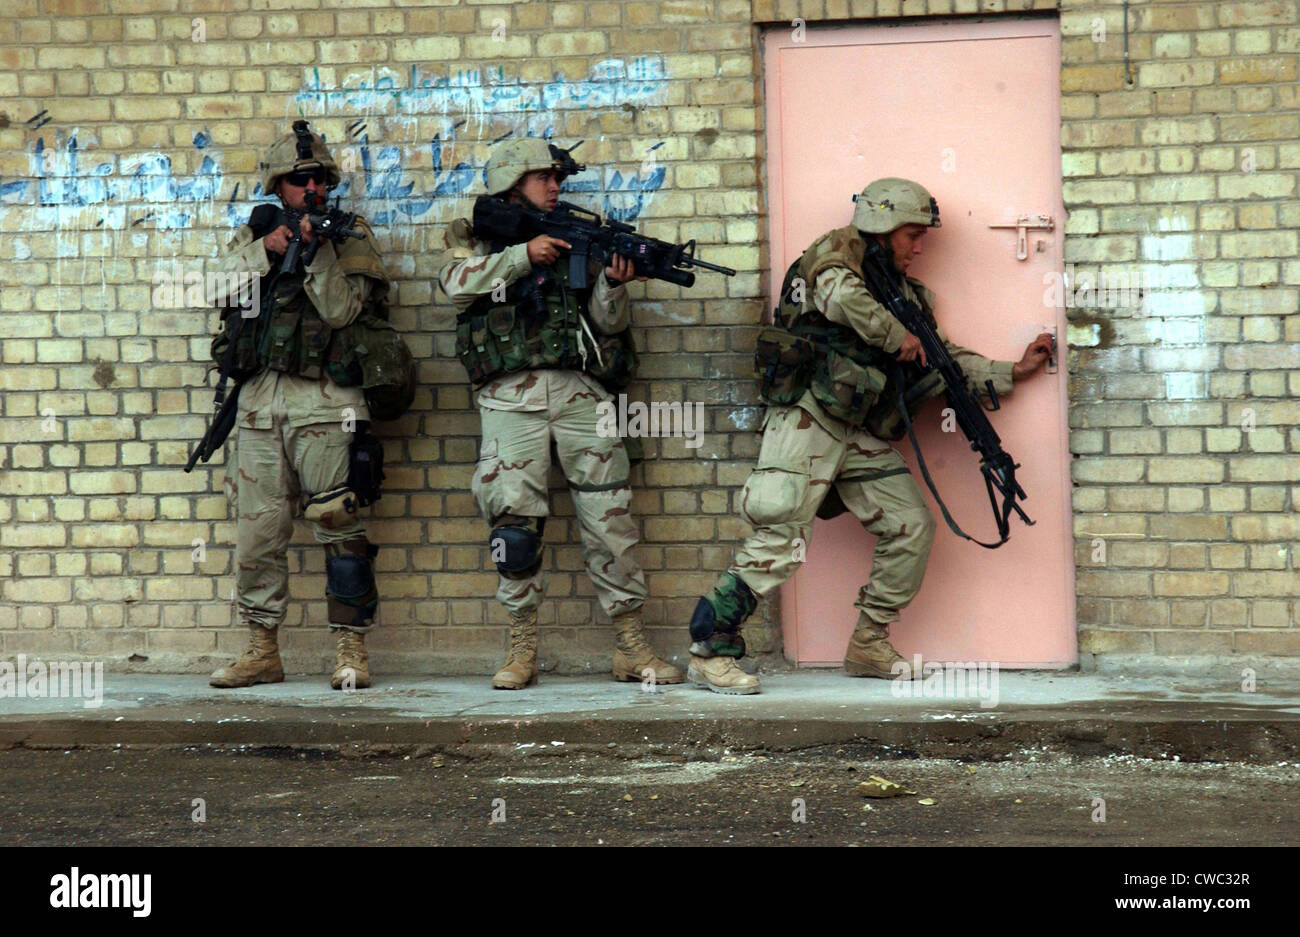 U.S. Army soldiers are poised to enter a building in Fallujah Iraq. Second Gulf War Nov. 9 2004. (BSLOC 2011 3 10) Stock Photo